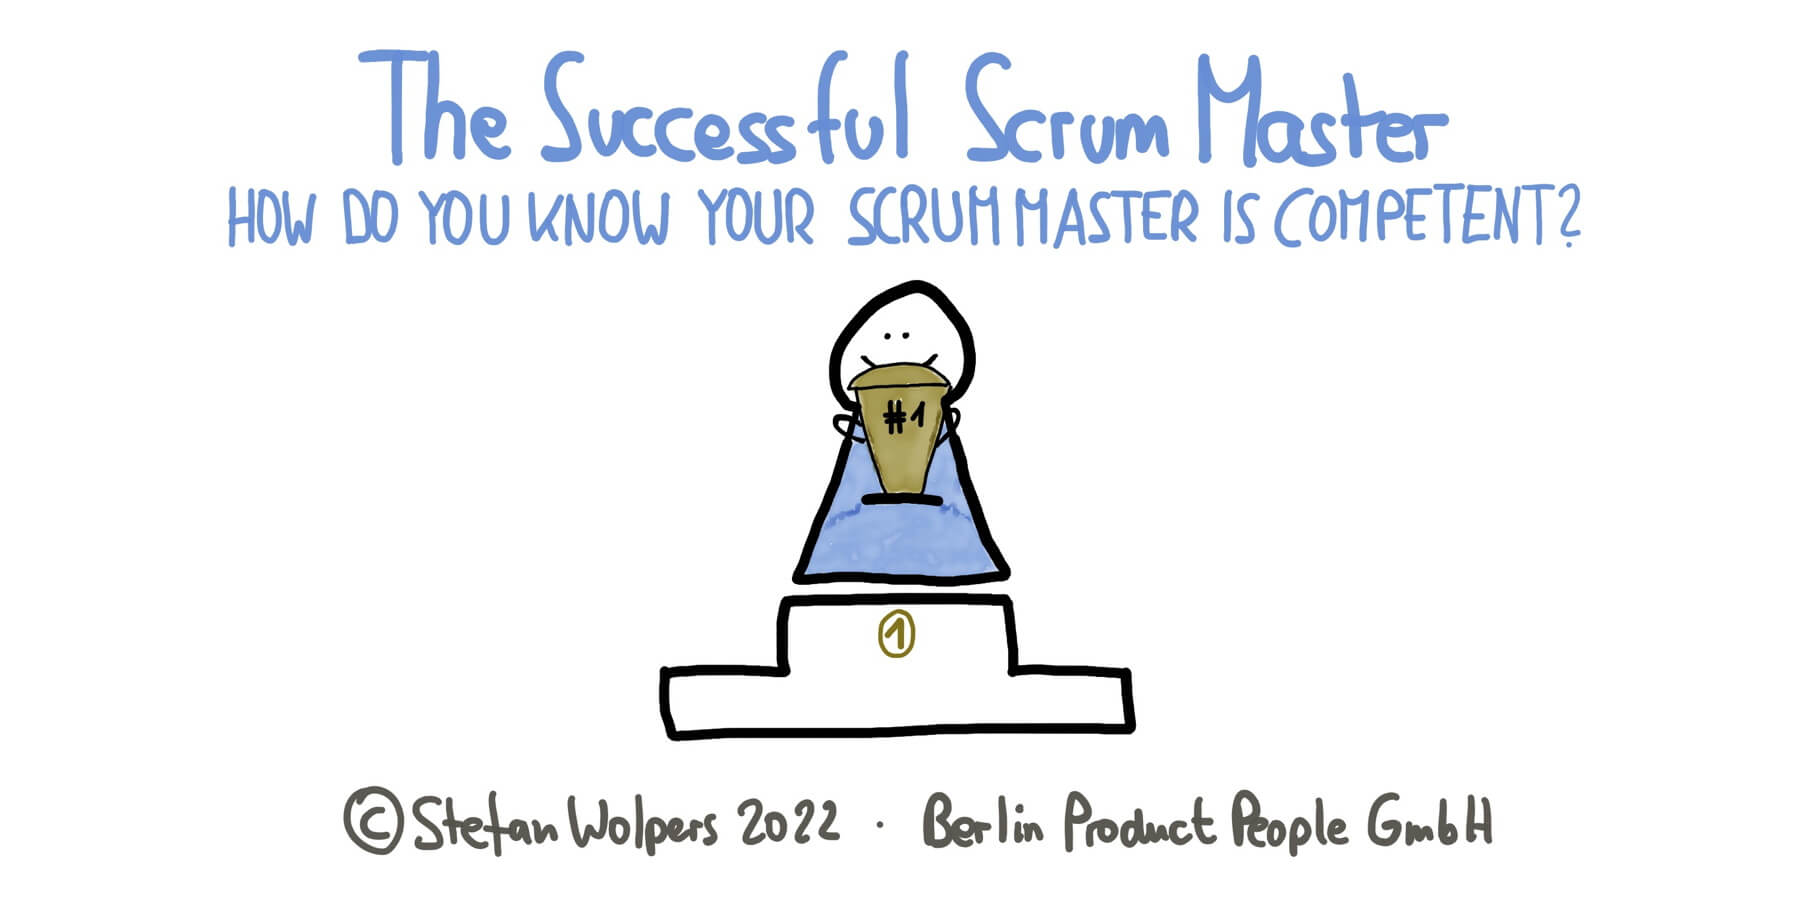 Scrum Master Success: How Do You Identify a Successful Scrum Master? Berlin Product People GmbH